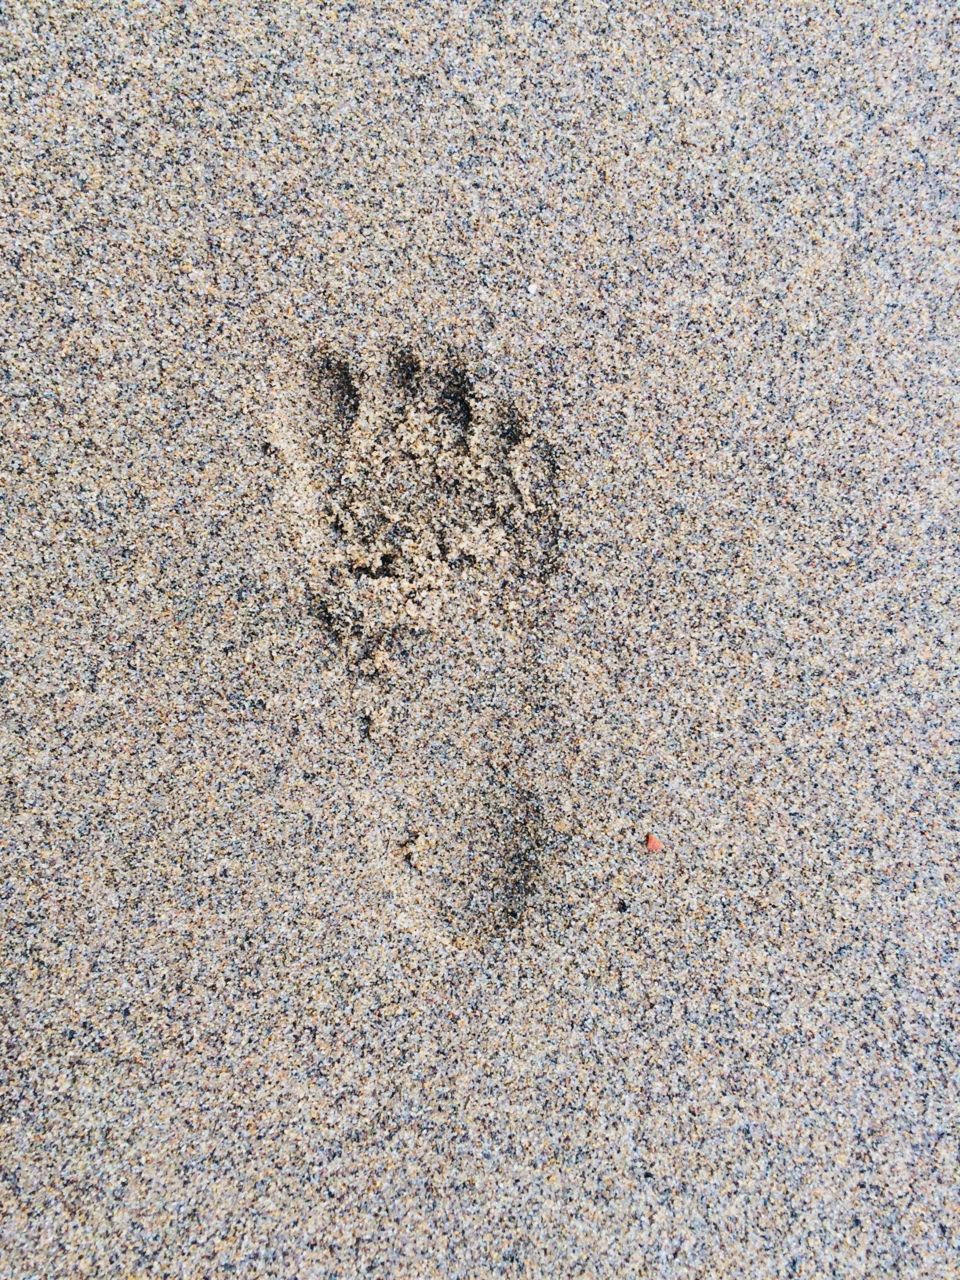 Footprint in the sand 